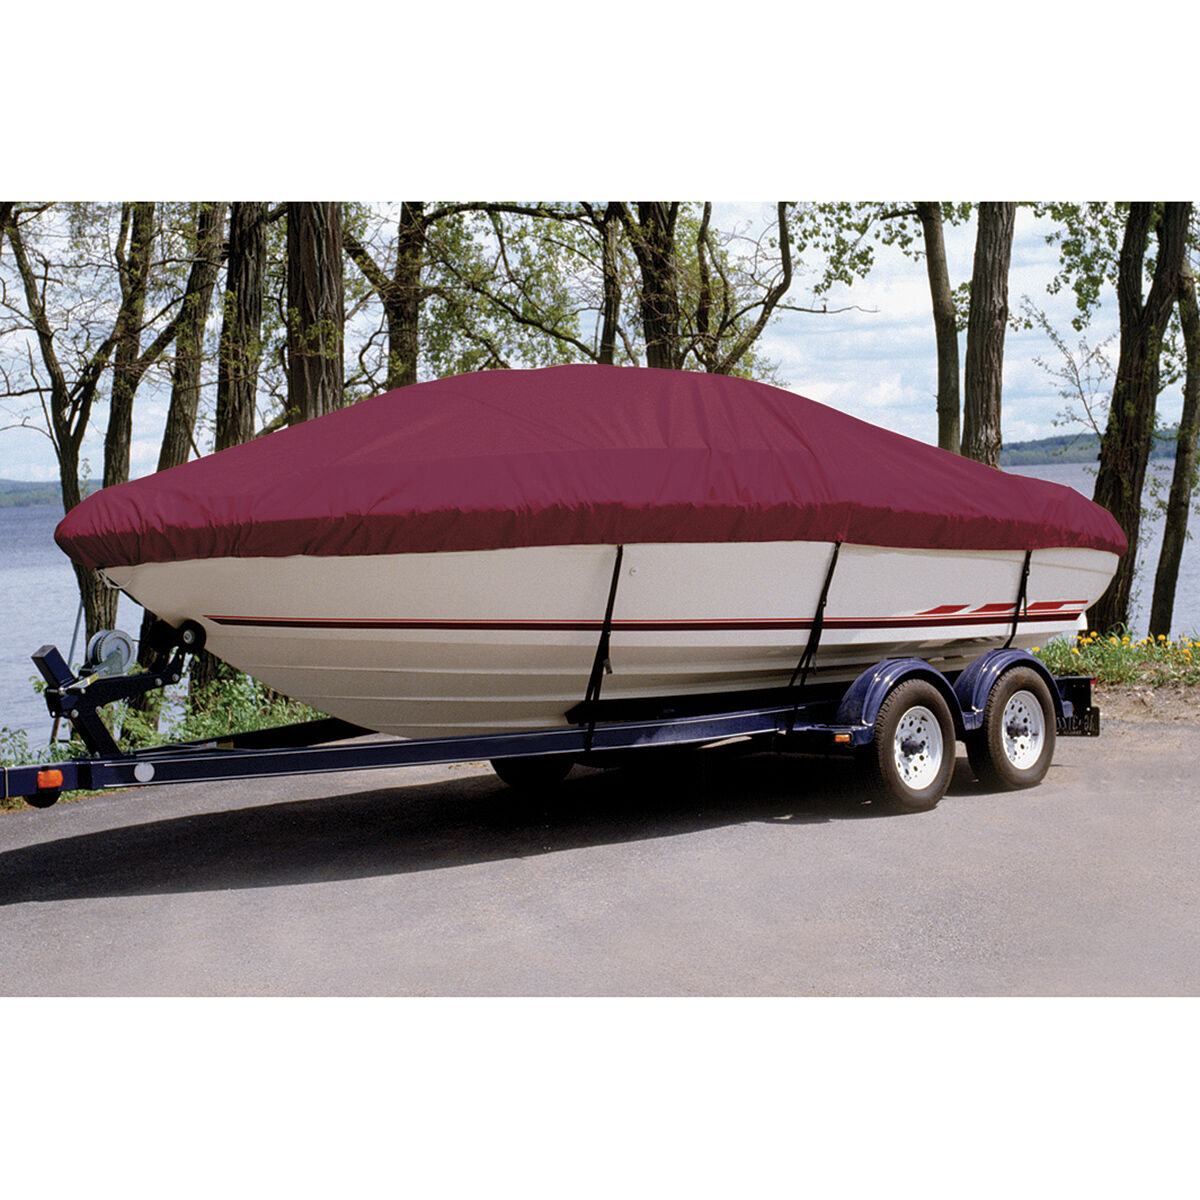 Taylor Made Trailerite Ultima Cover for 98-01 Klamath 15 Stinger/ADV/SS/R/Hood Boat Cover in Cranberry Polyester